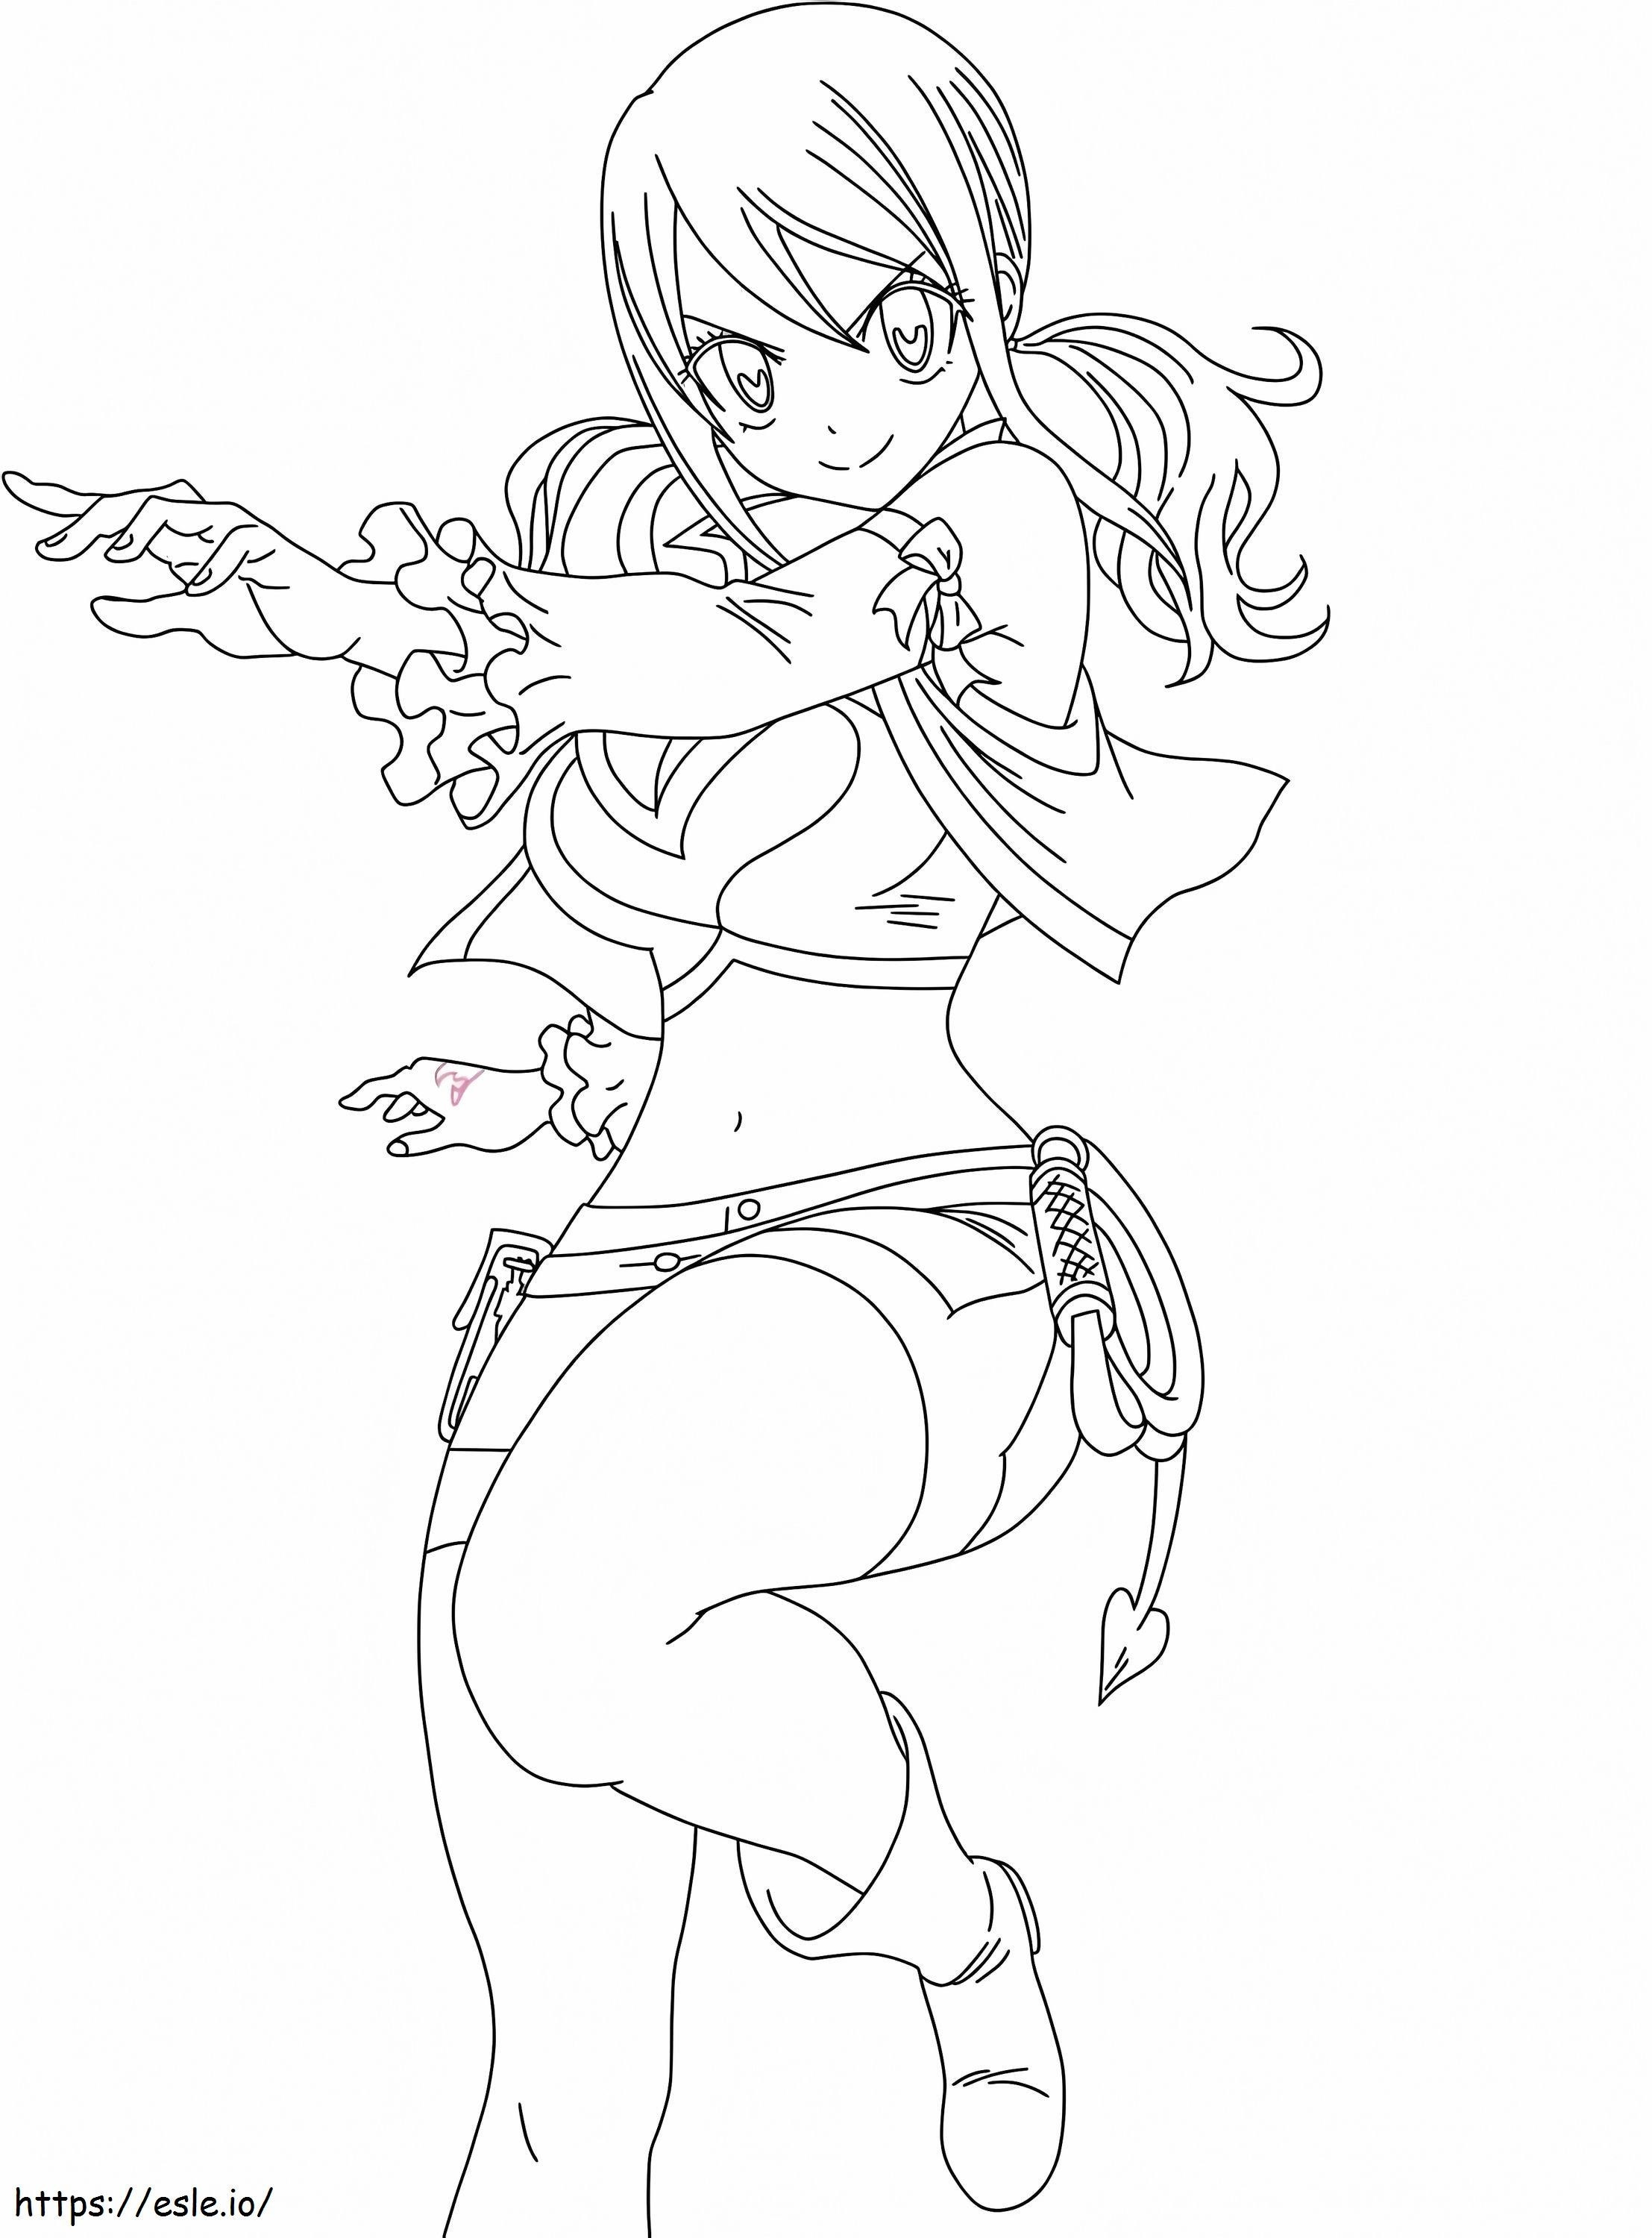 Action Lucy Heartfilia coloring page